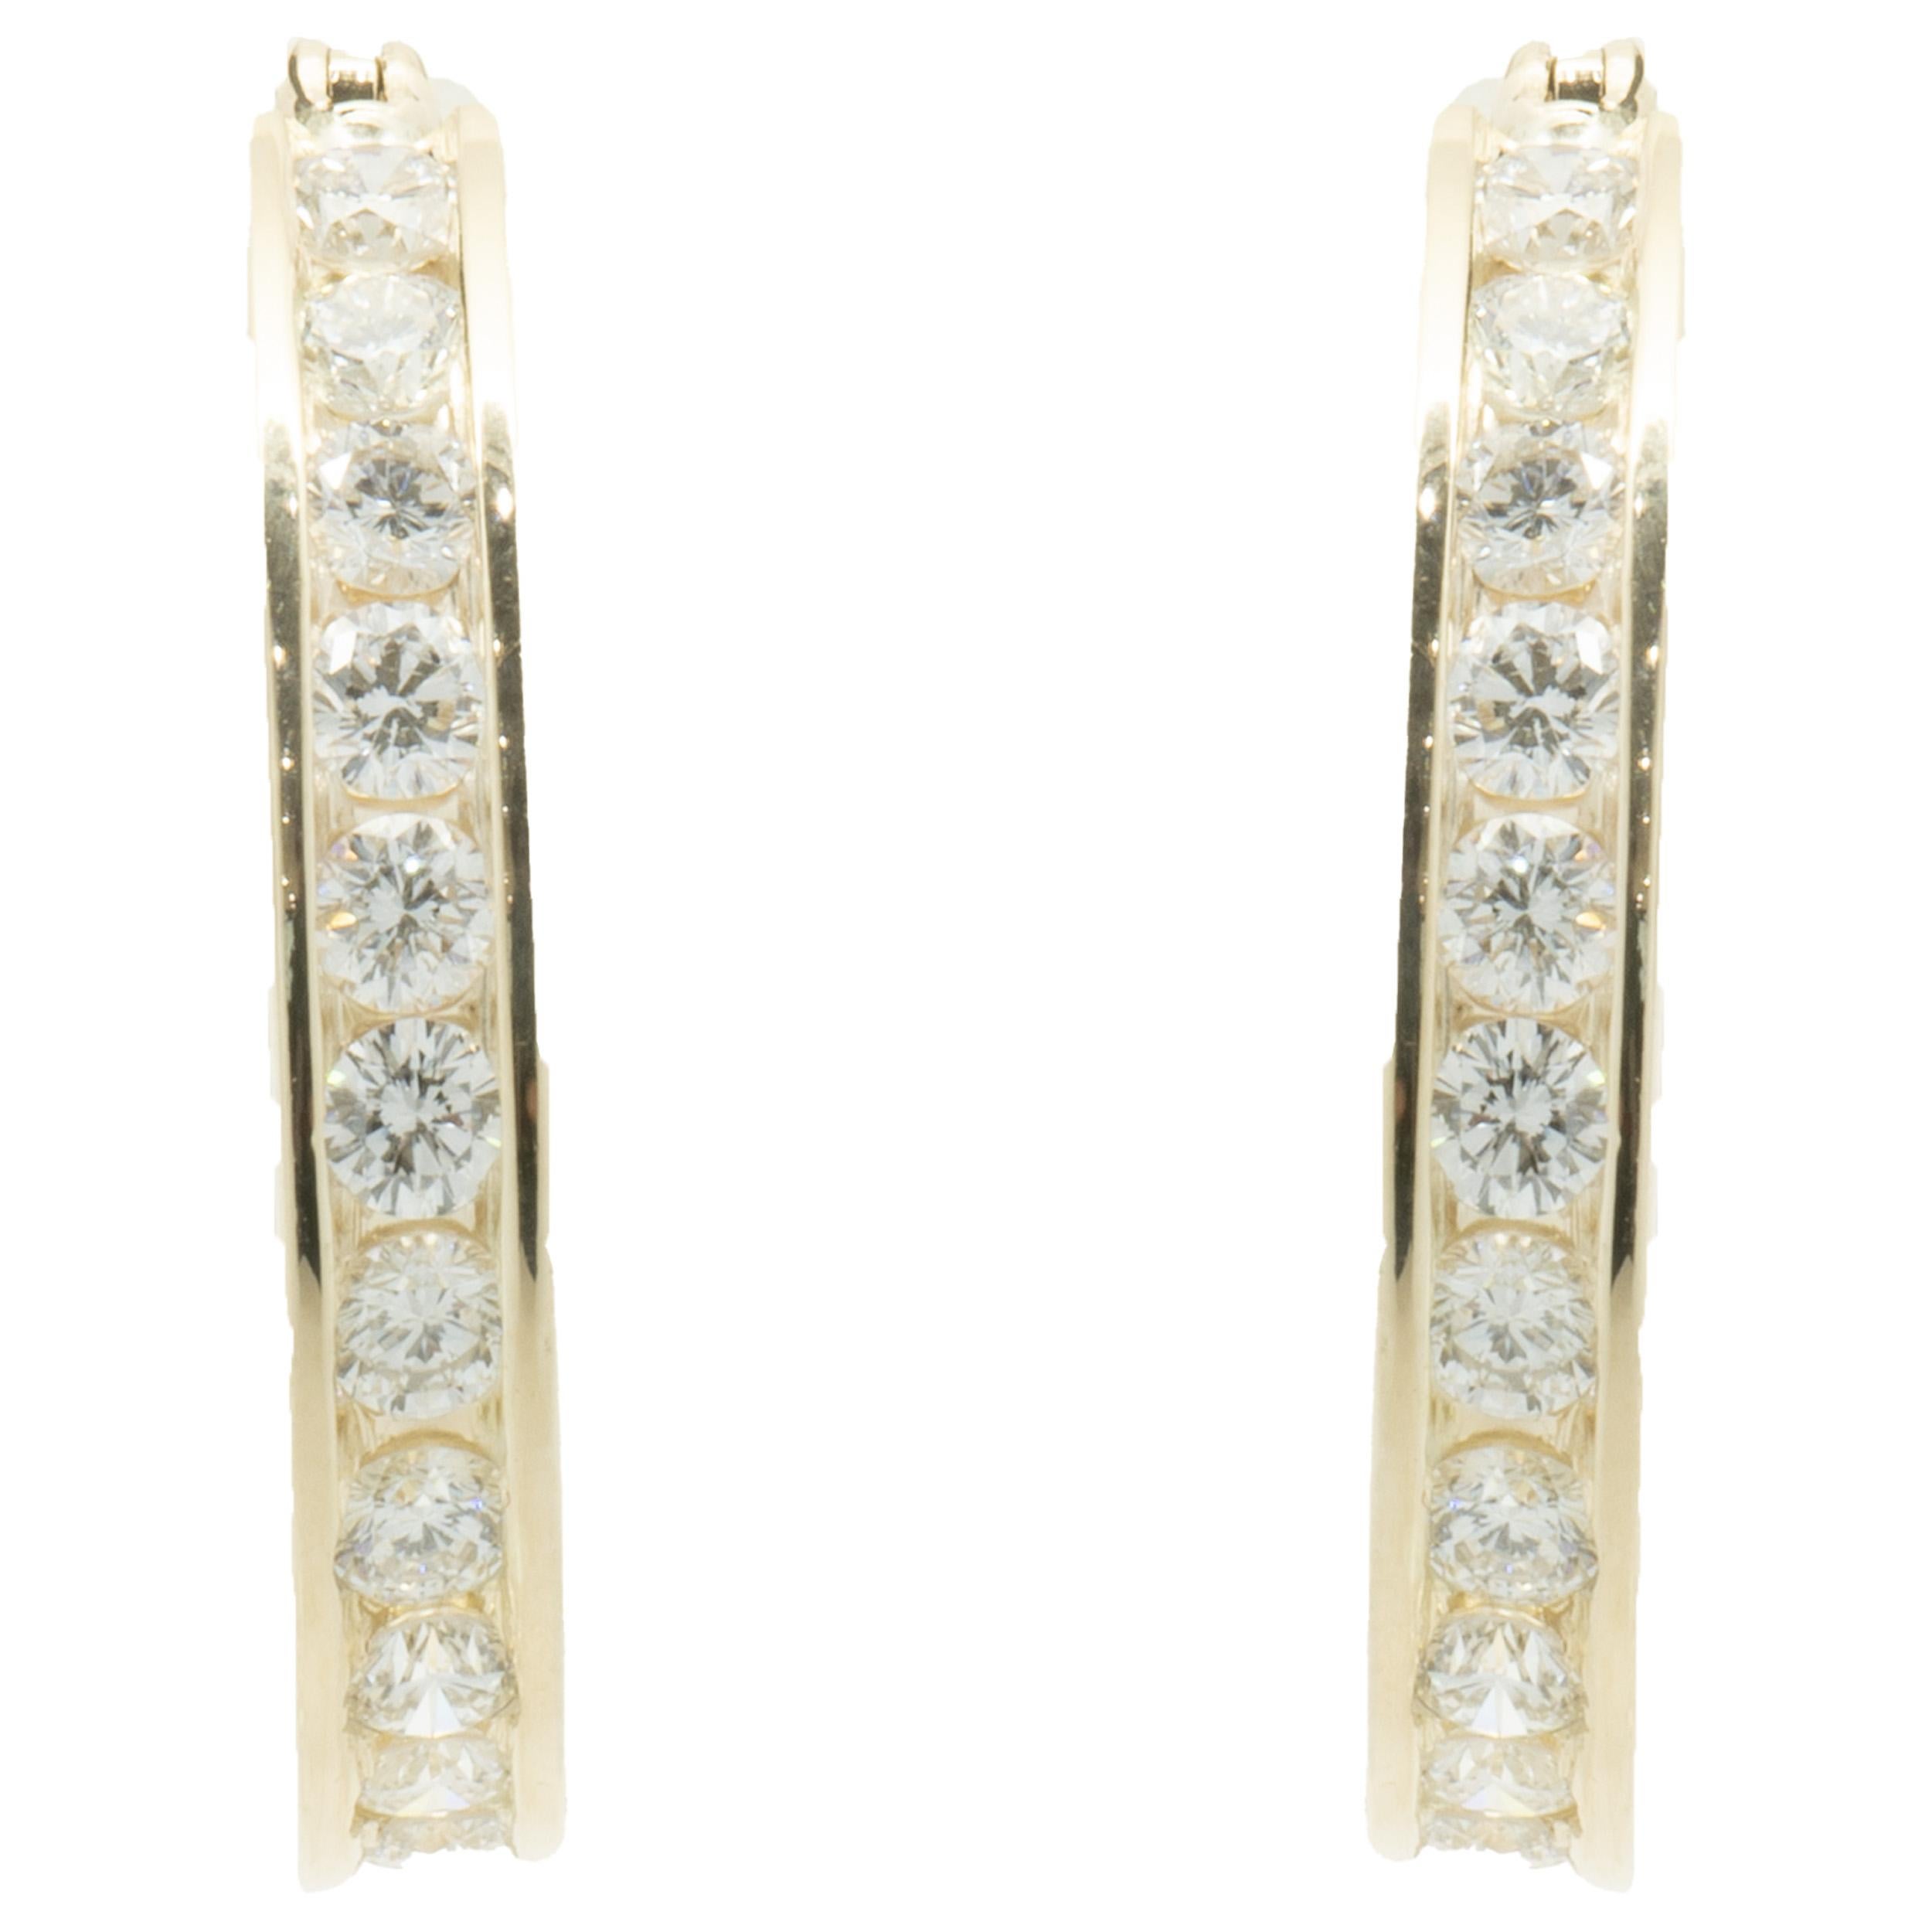 Designer: Custom
Material: 14K yellow gold
Diamond: 24 round brilliant cut = 1.95cttw
Color: G
Clarity SI1-2
Dimensions: earrings measure 25mm long
Weight: 7.85 grams
